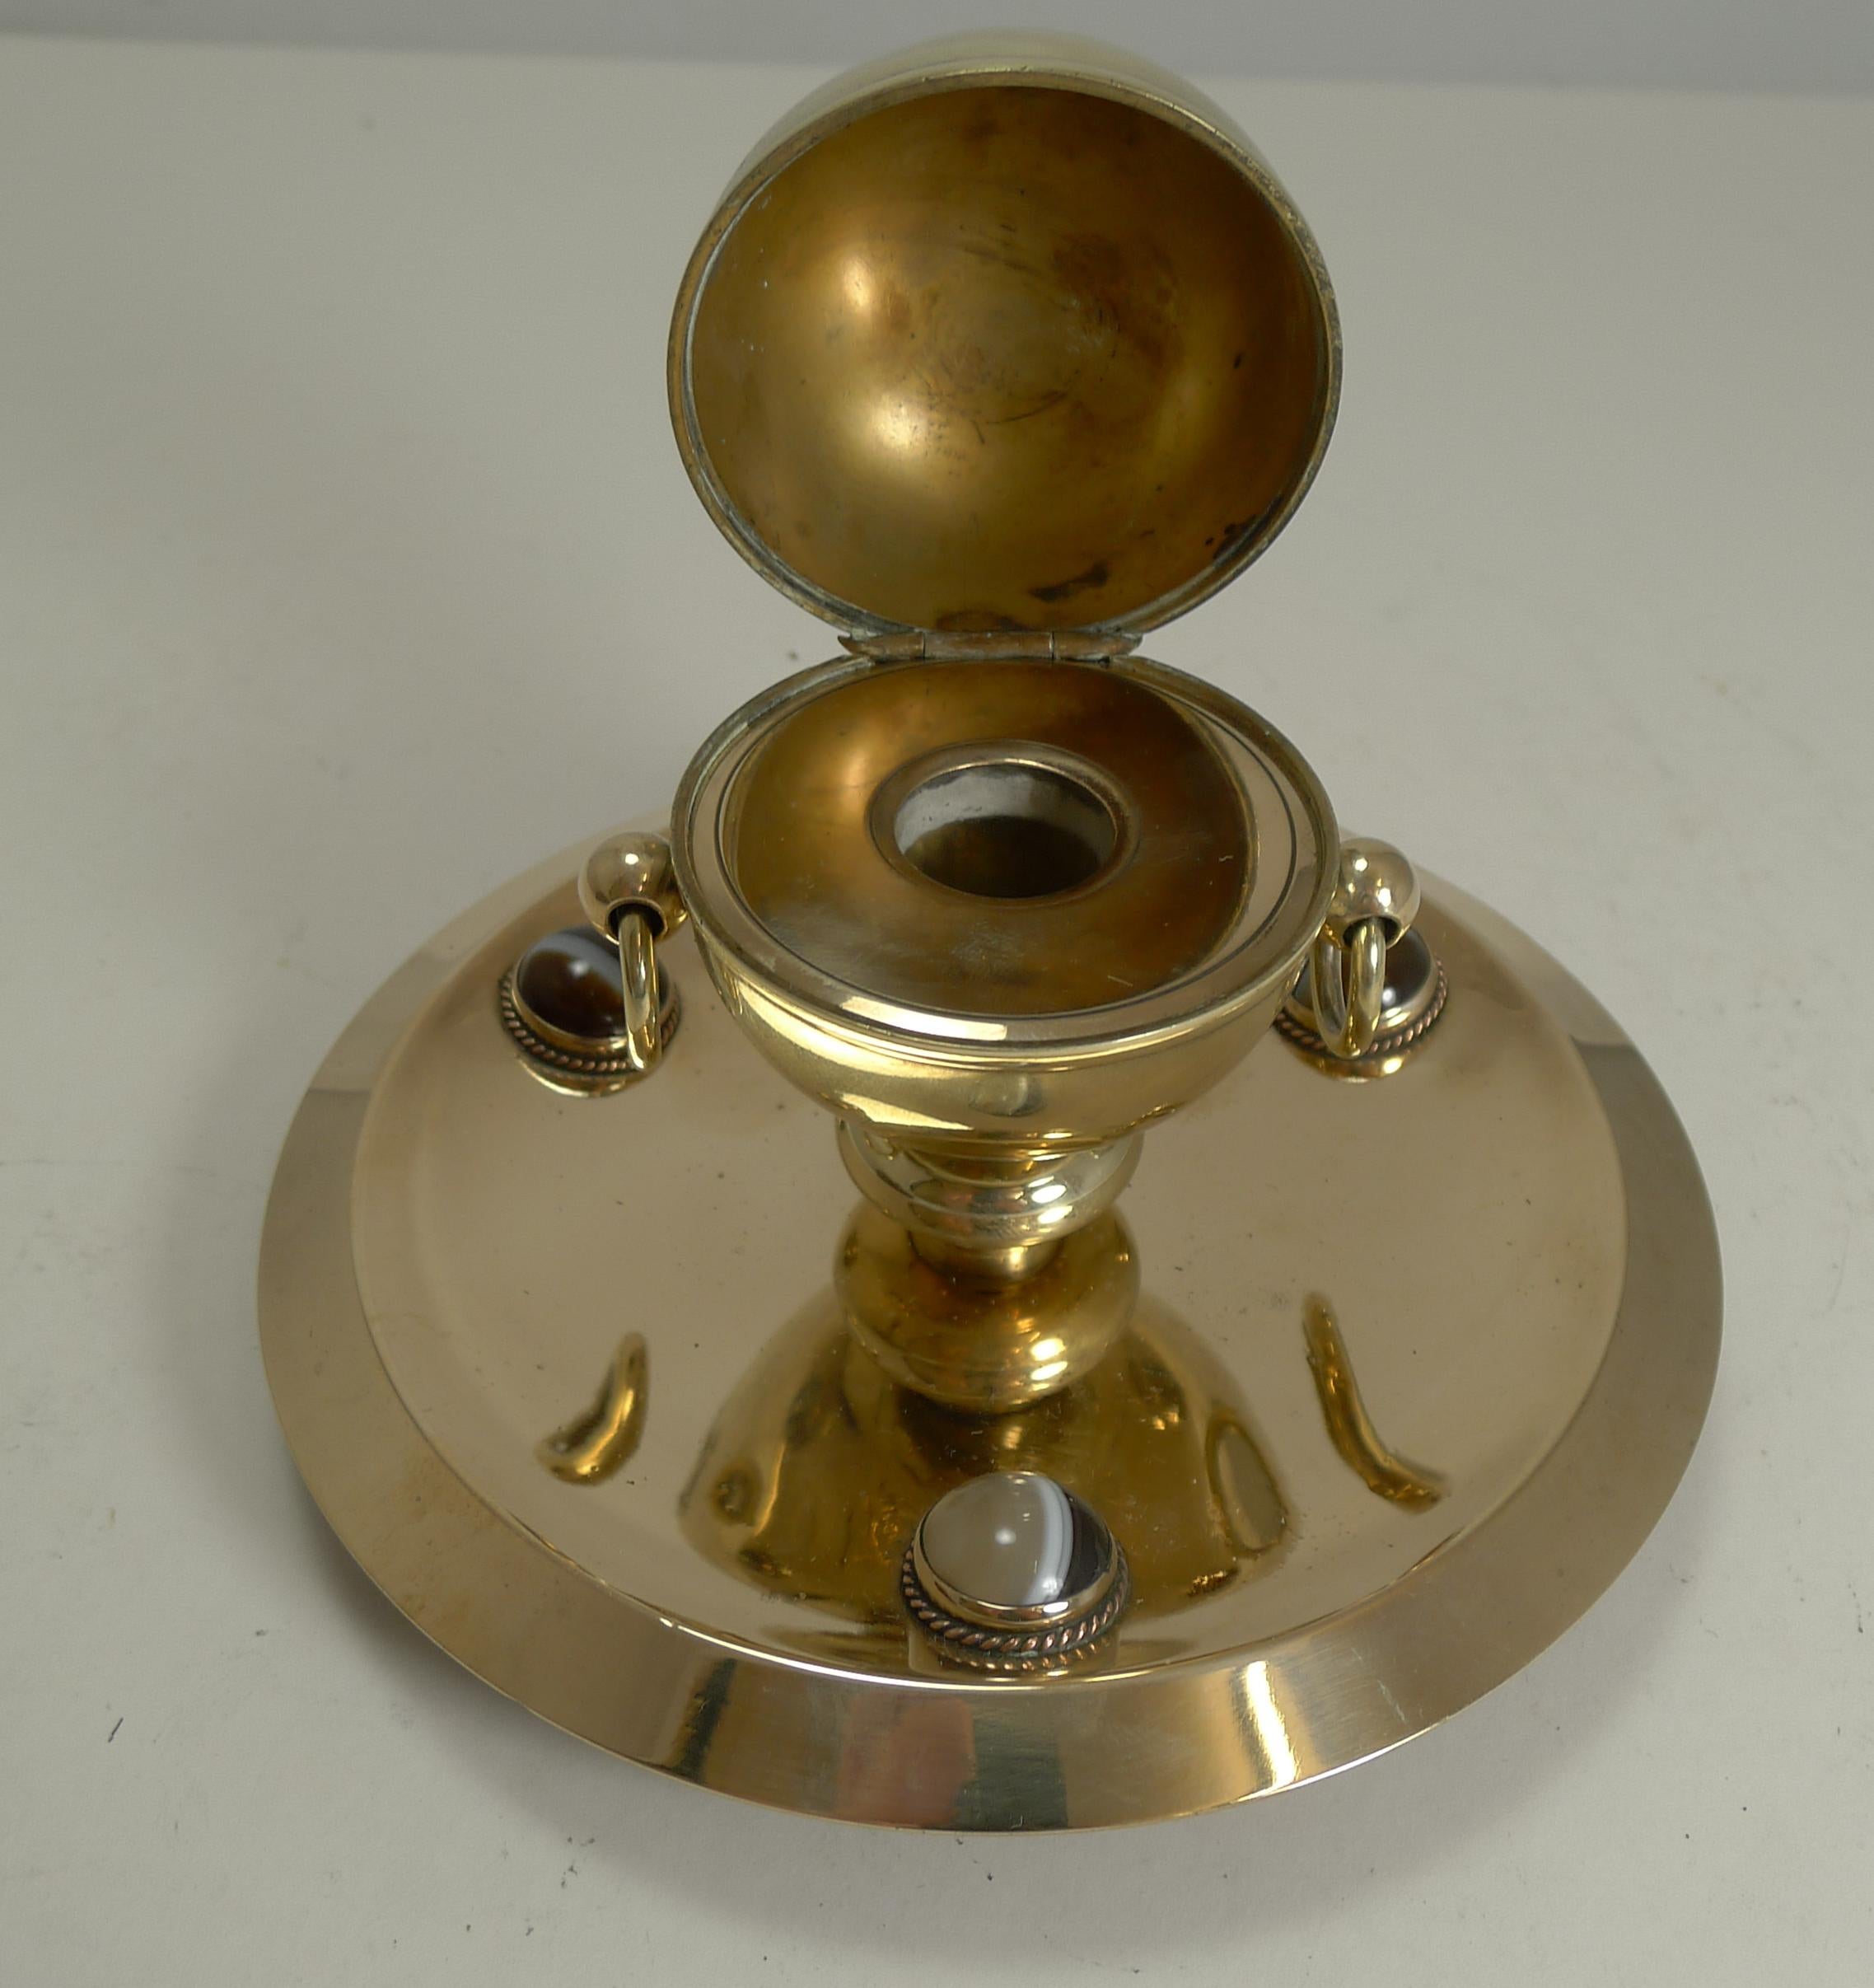 Late 19th Century Smart Antique English Polished Brass and Bronze Inkwell, Agate Mounts circa 1880